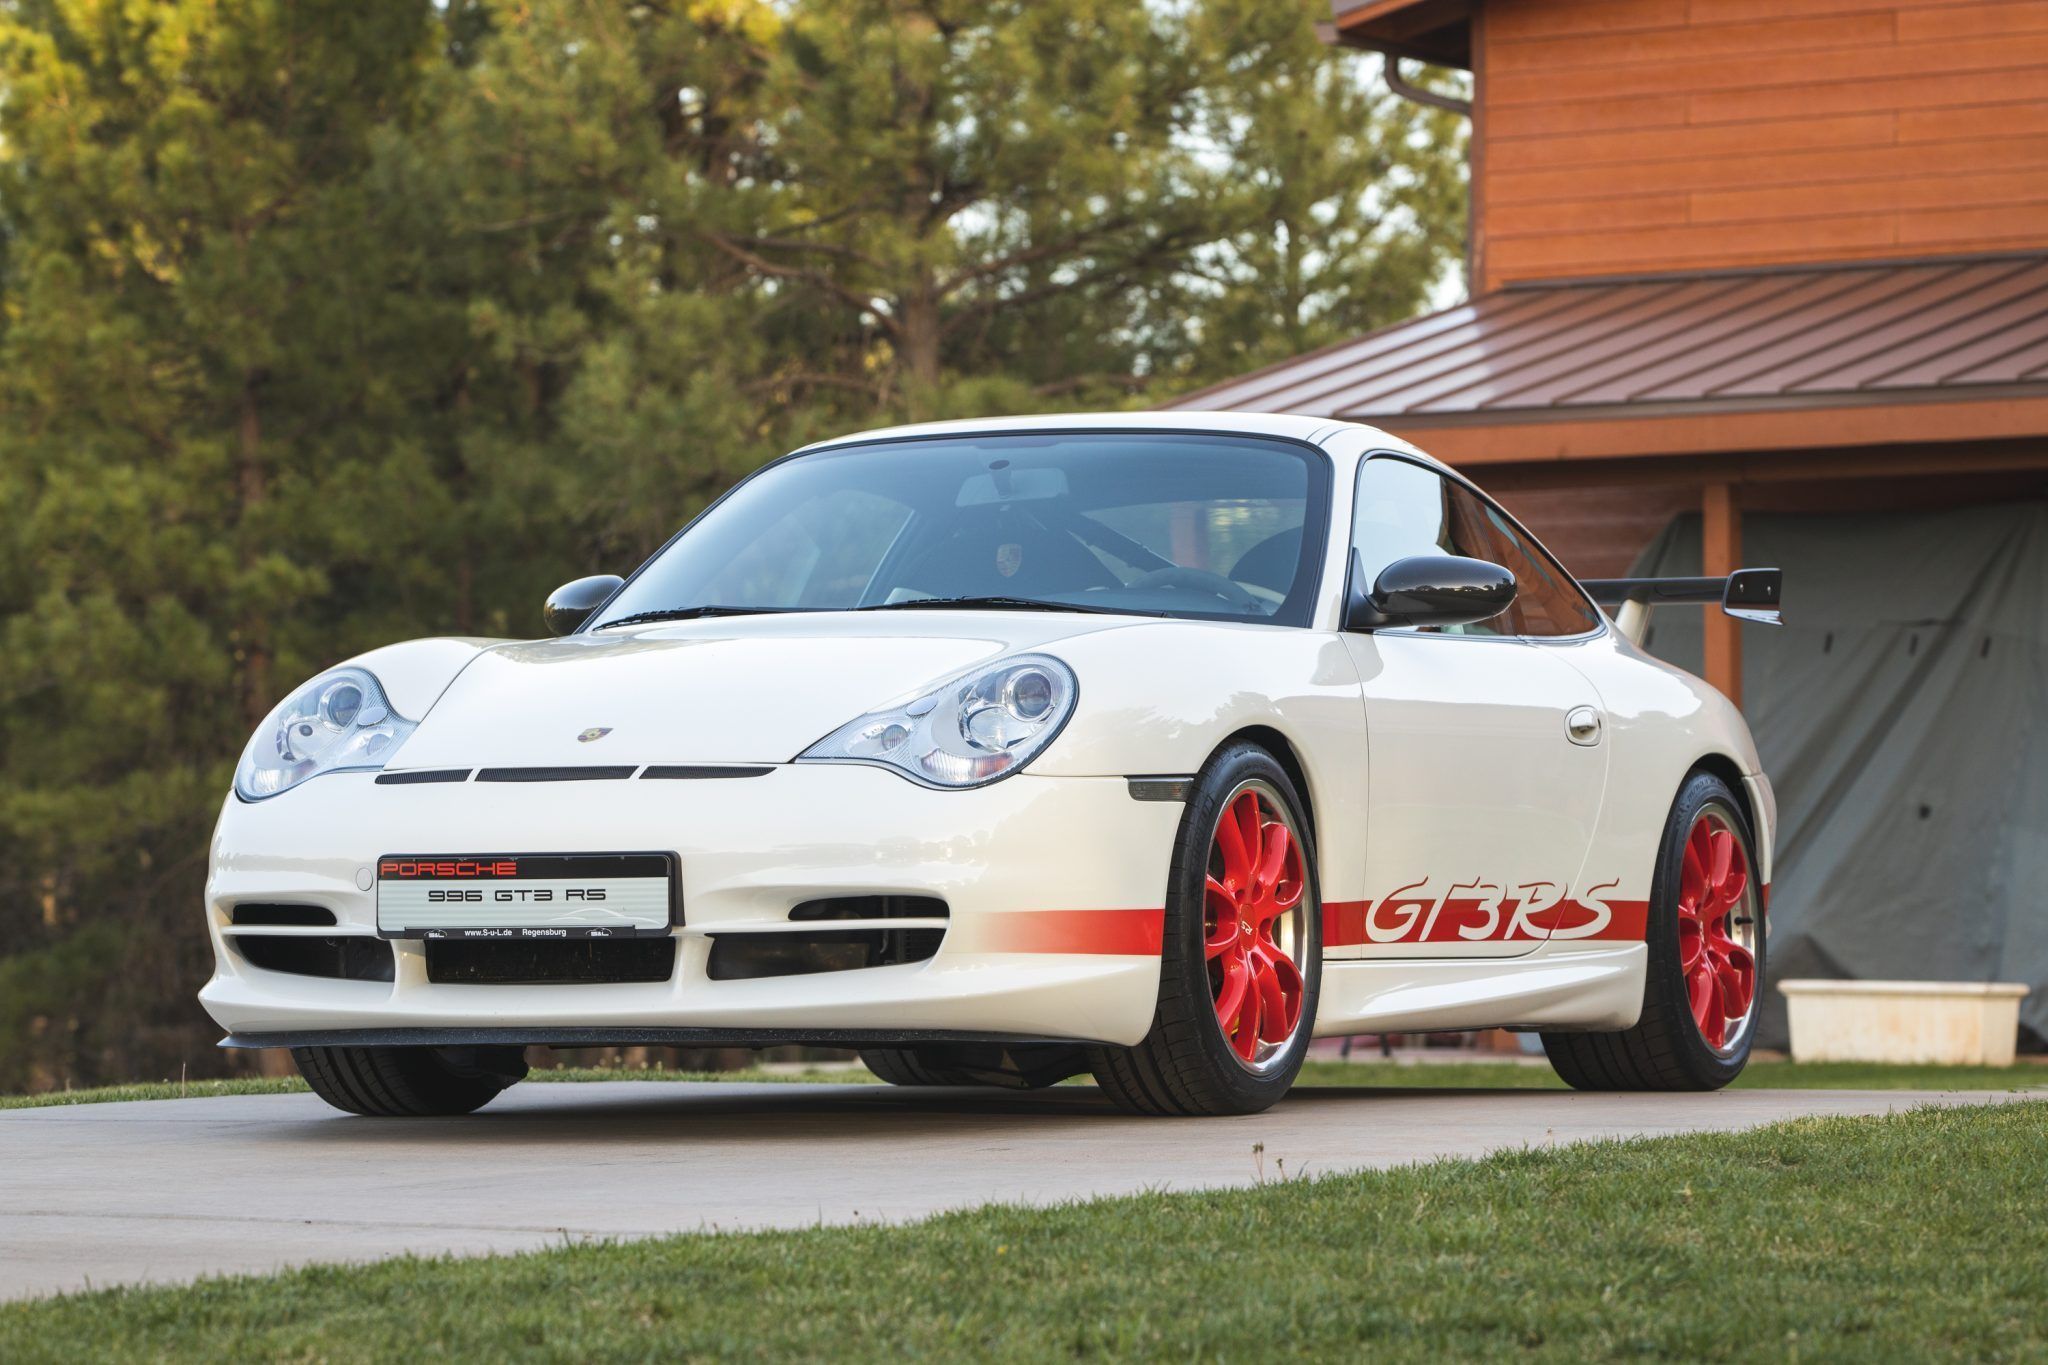 Porsche 996: The iconic sports car designed for all ages.